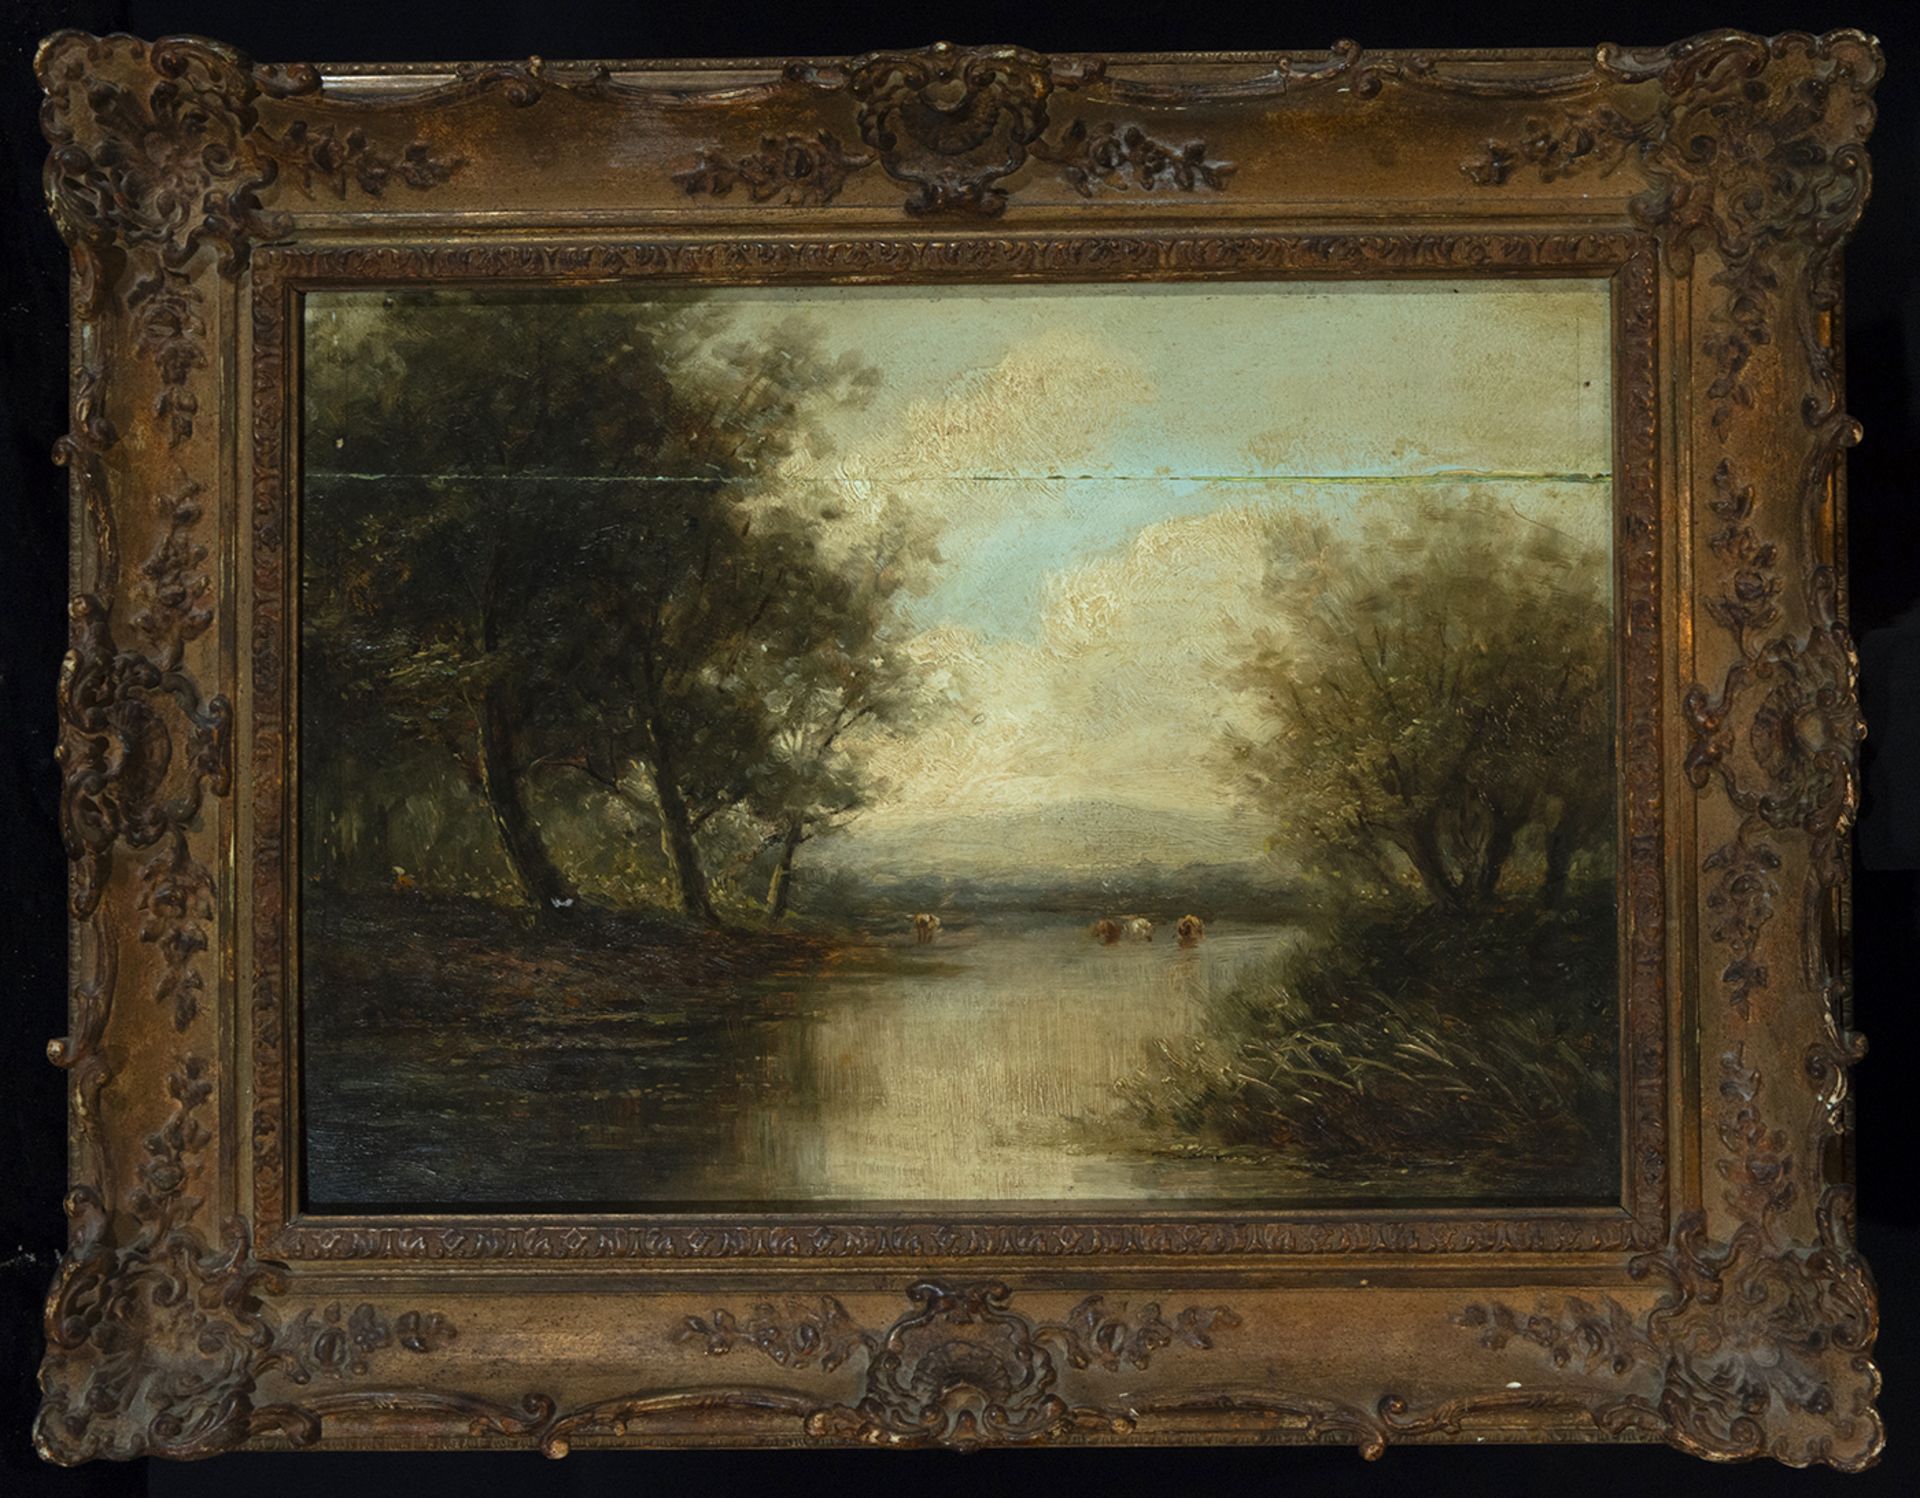 Elegant Dutch Landscape on panel with Cows watering on the riverbank, Dutch school 19th century